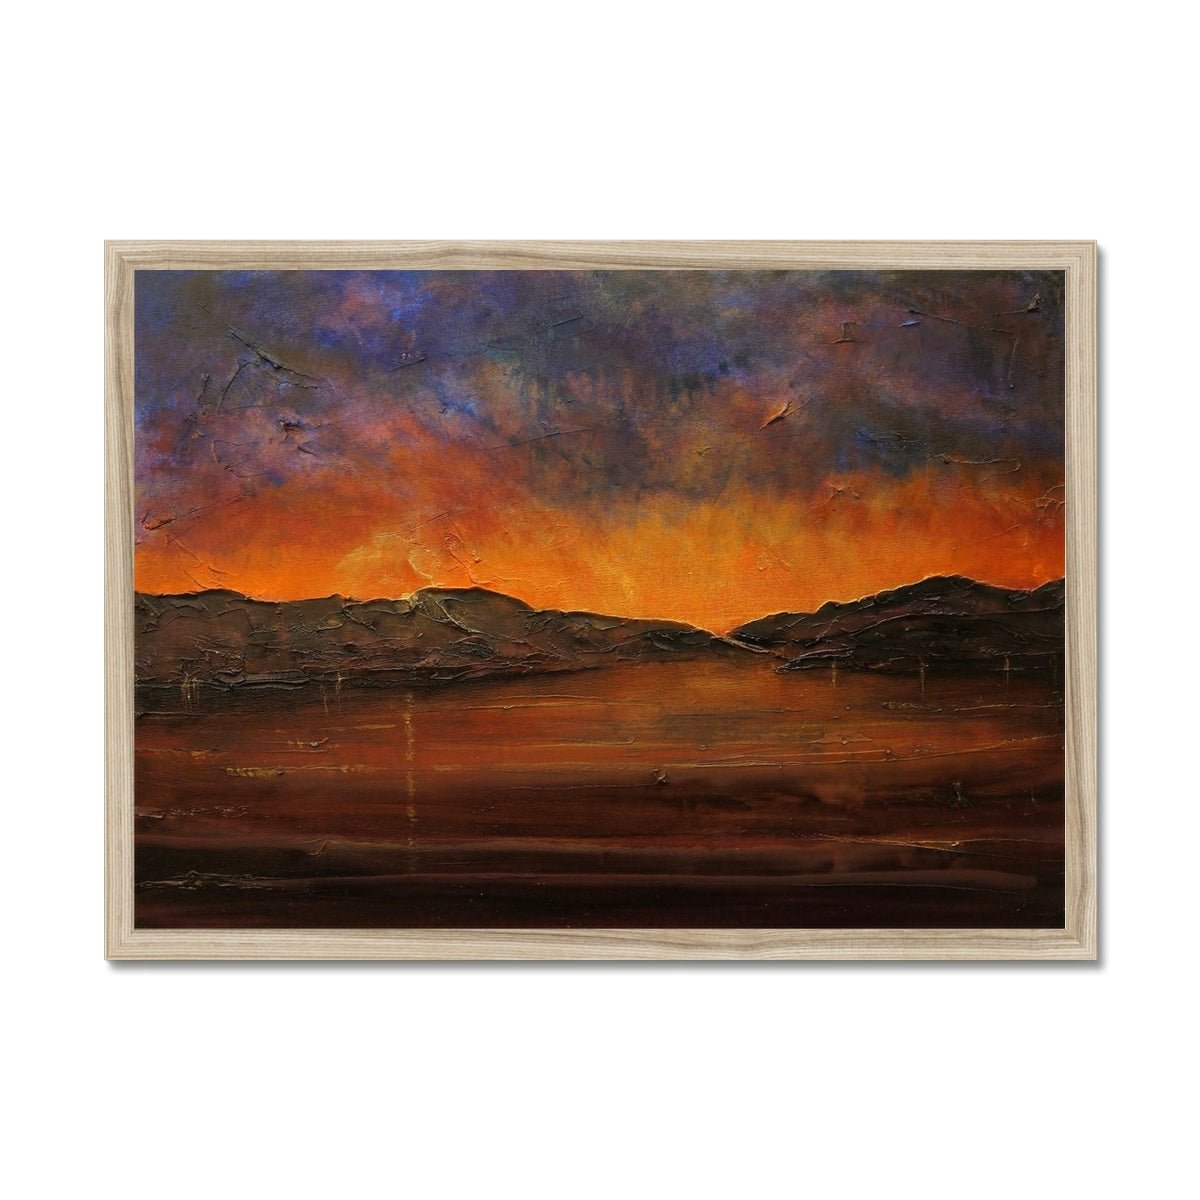 A Brooding River Clyde Dusk Painting | Framed Prints From Scotland-Framed Prints-River Clyde Art Gallery-A2 Landscape-Natural Frame-Paintings, Prints, Homeware, Art Gifts From Scotland By Scottish Artist Kevin Hunter